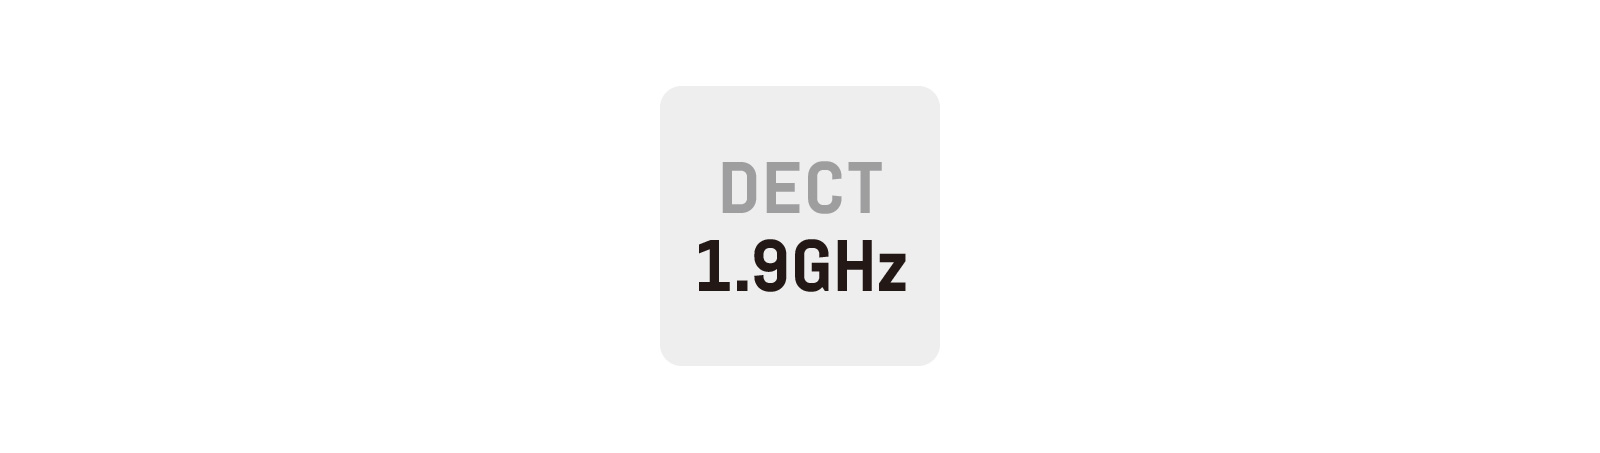 1.9GHz帯（DECT方式）